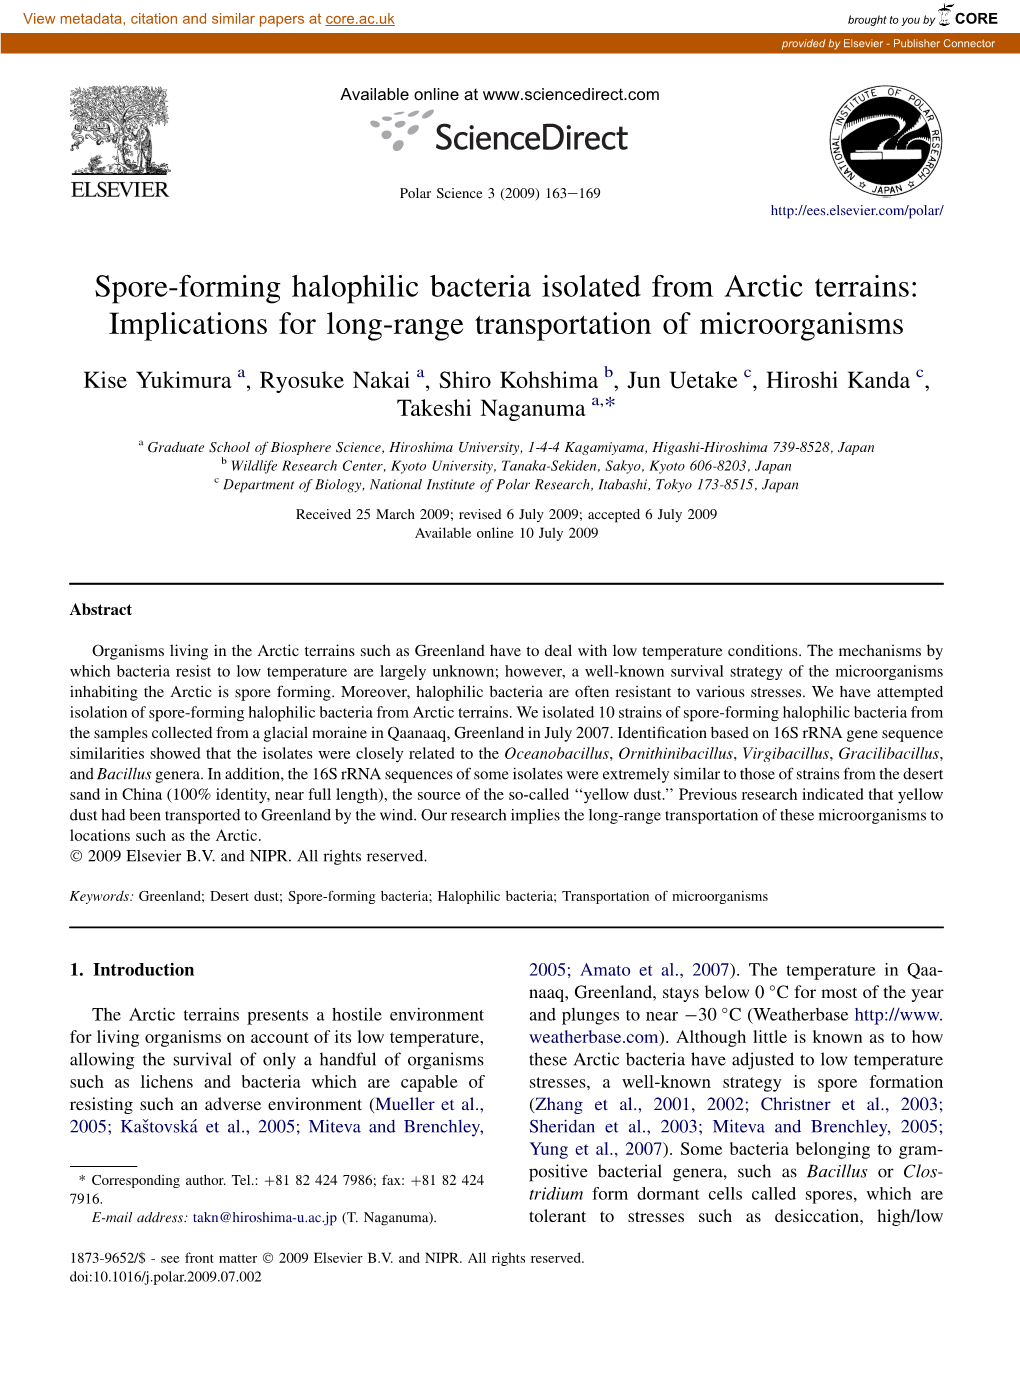 Spore-Forming Halophilic Bacteria Isolated from Arctic Terrains: Implications for Long-Range Transportation of Microorganisms